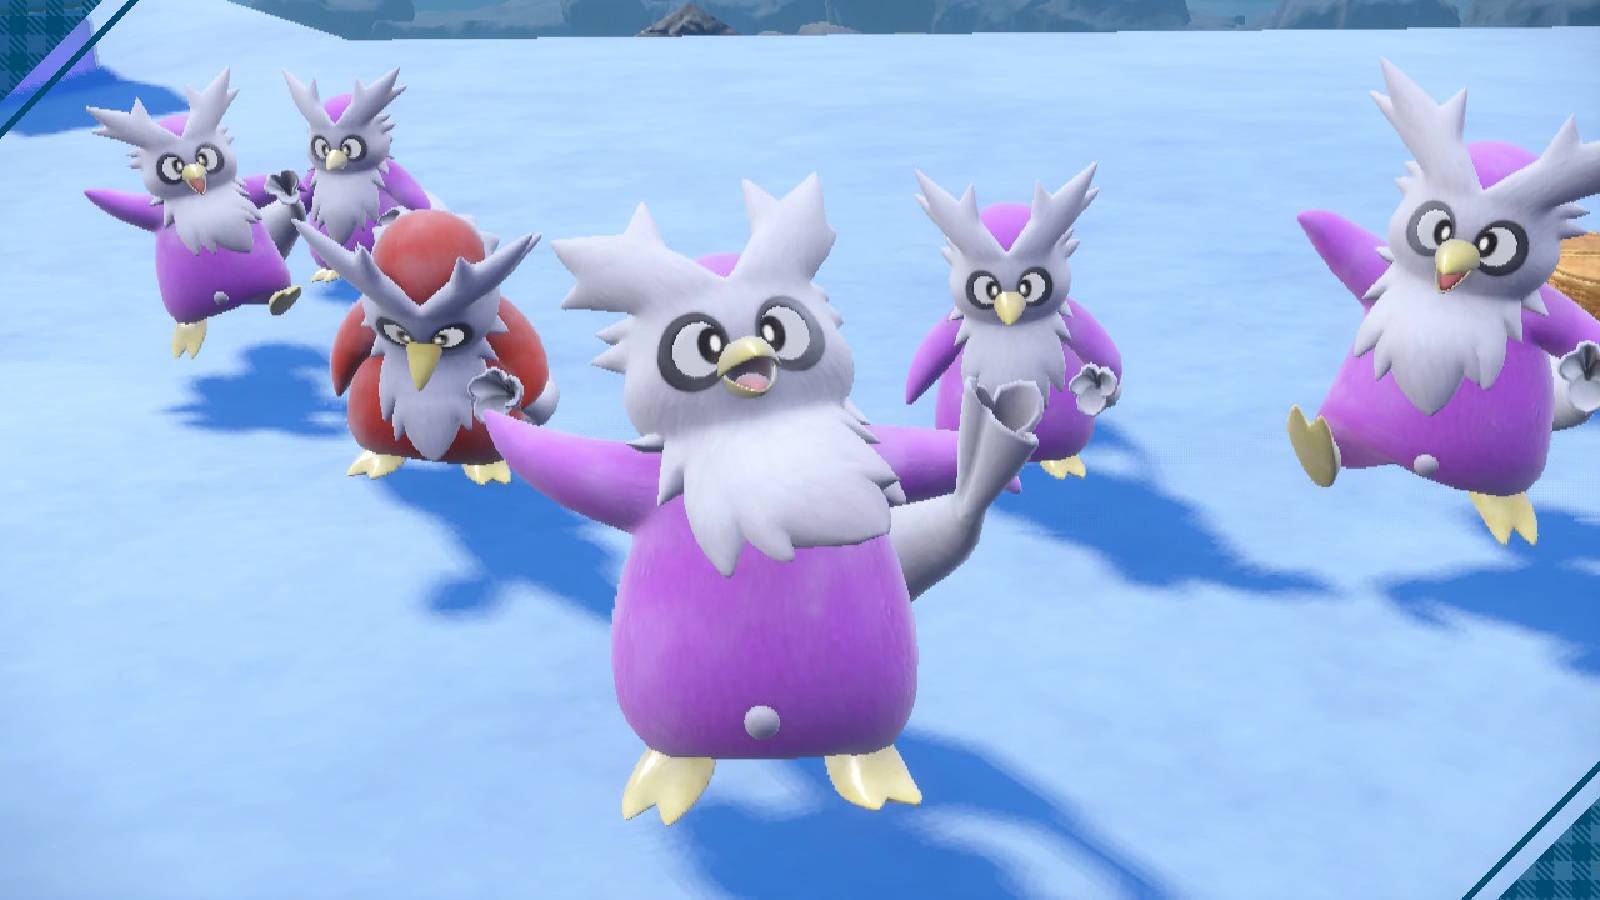 A screenshot from Pokemon Scarlet & Violet shows several Shiny forms of Delibird all gathered together